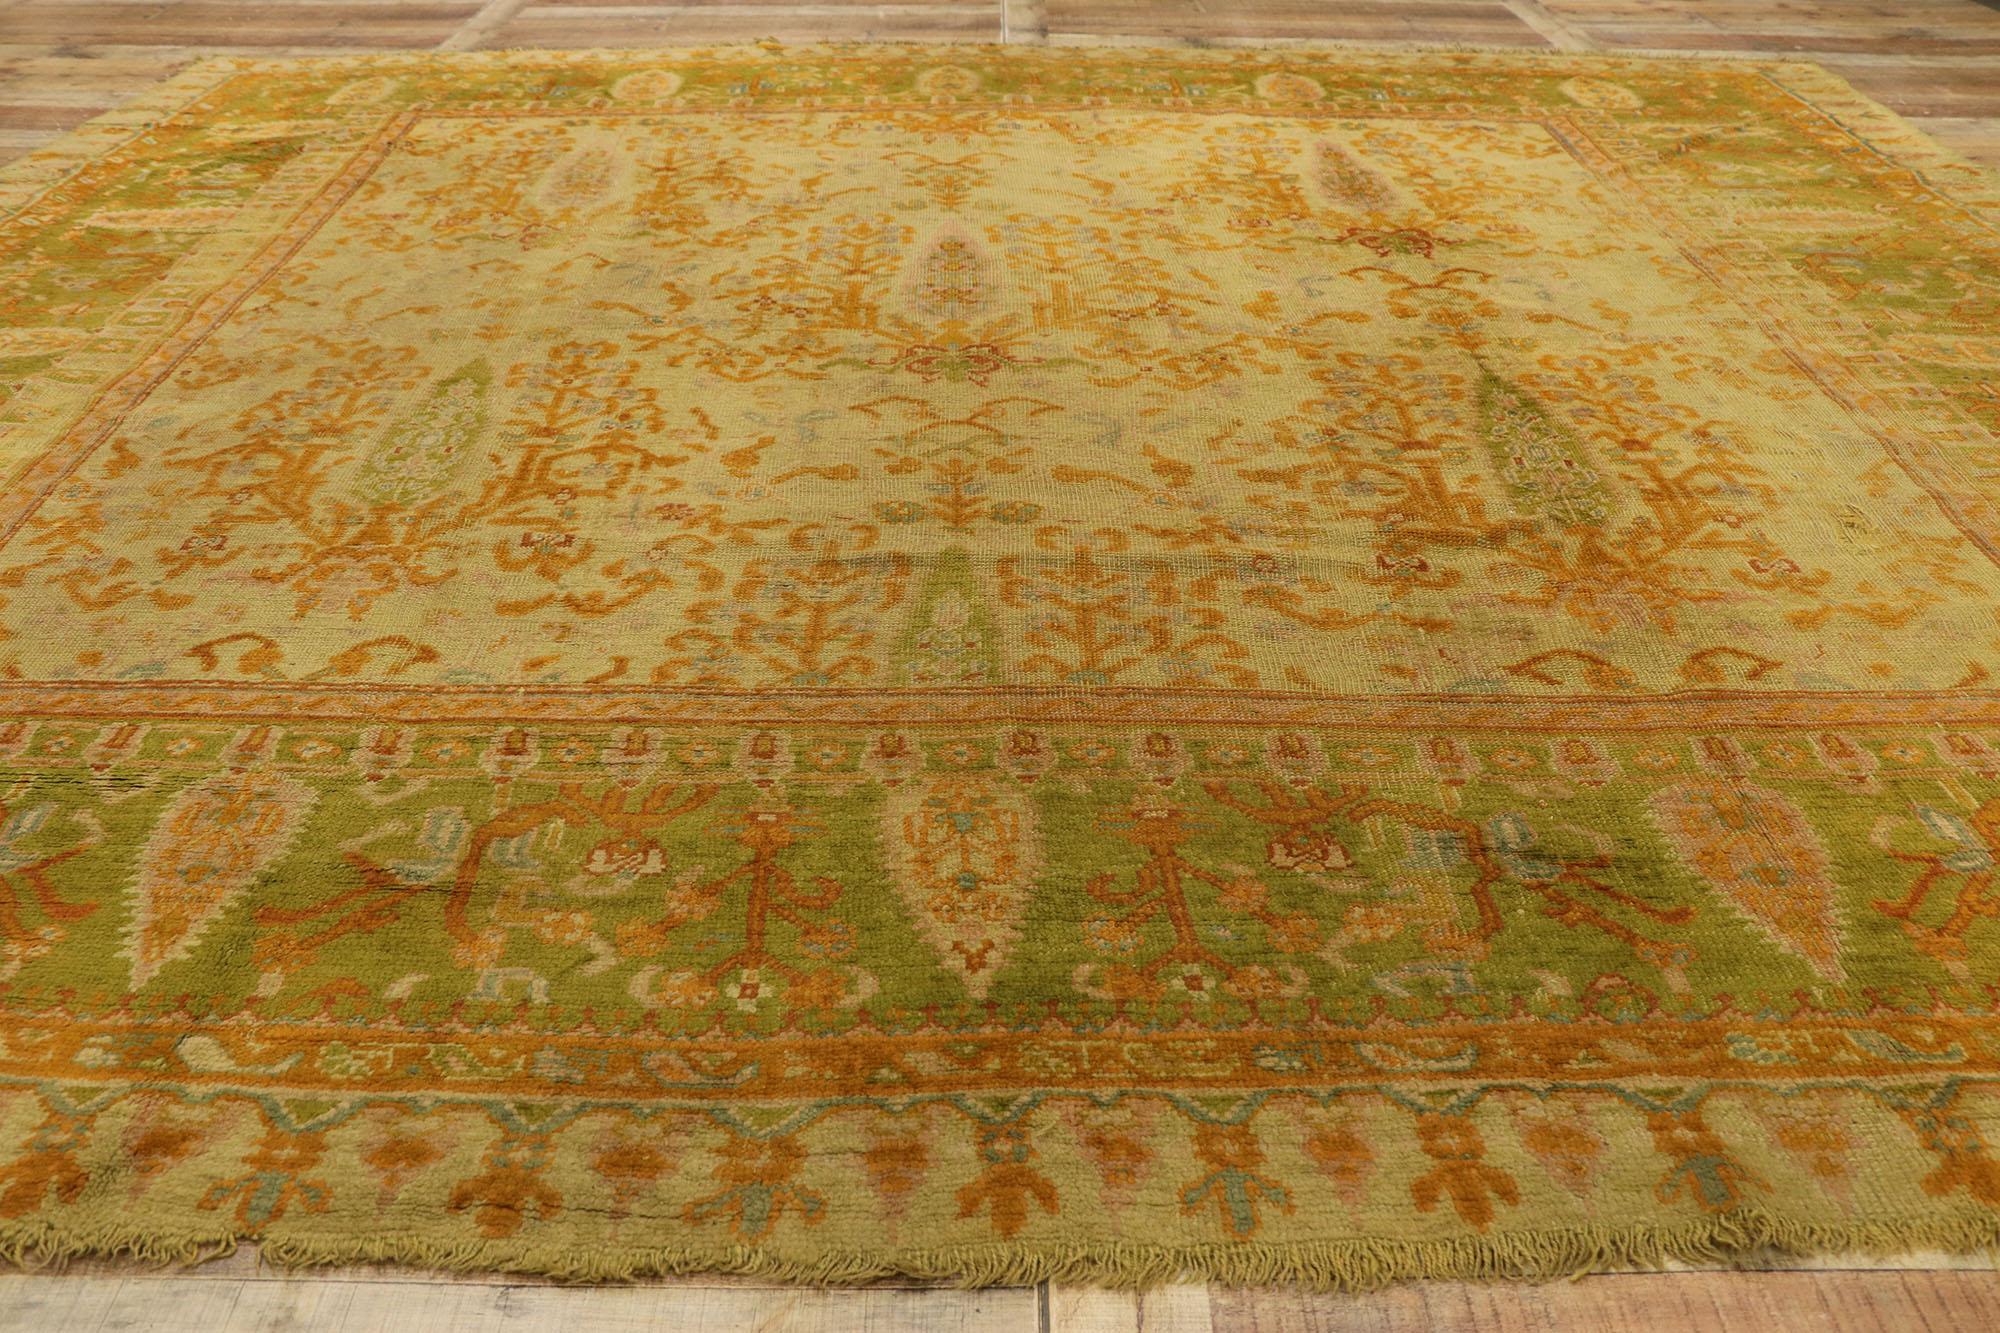 1890s Antique Turkish Oushak Rug, Italian Nonna Chic Meets Maximalist Style For Sale 4